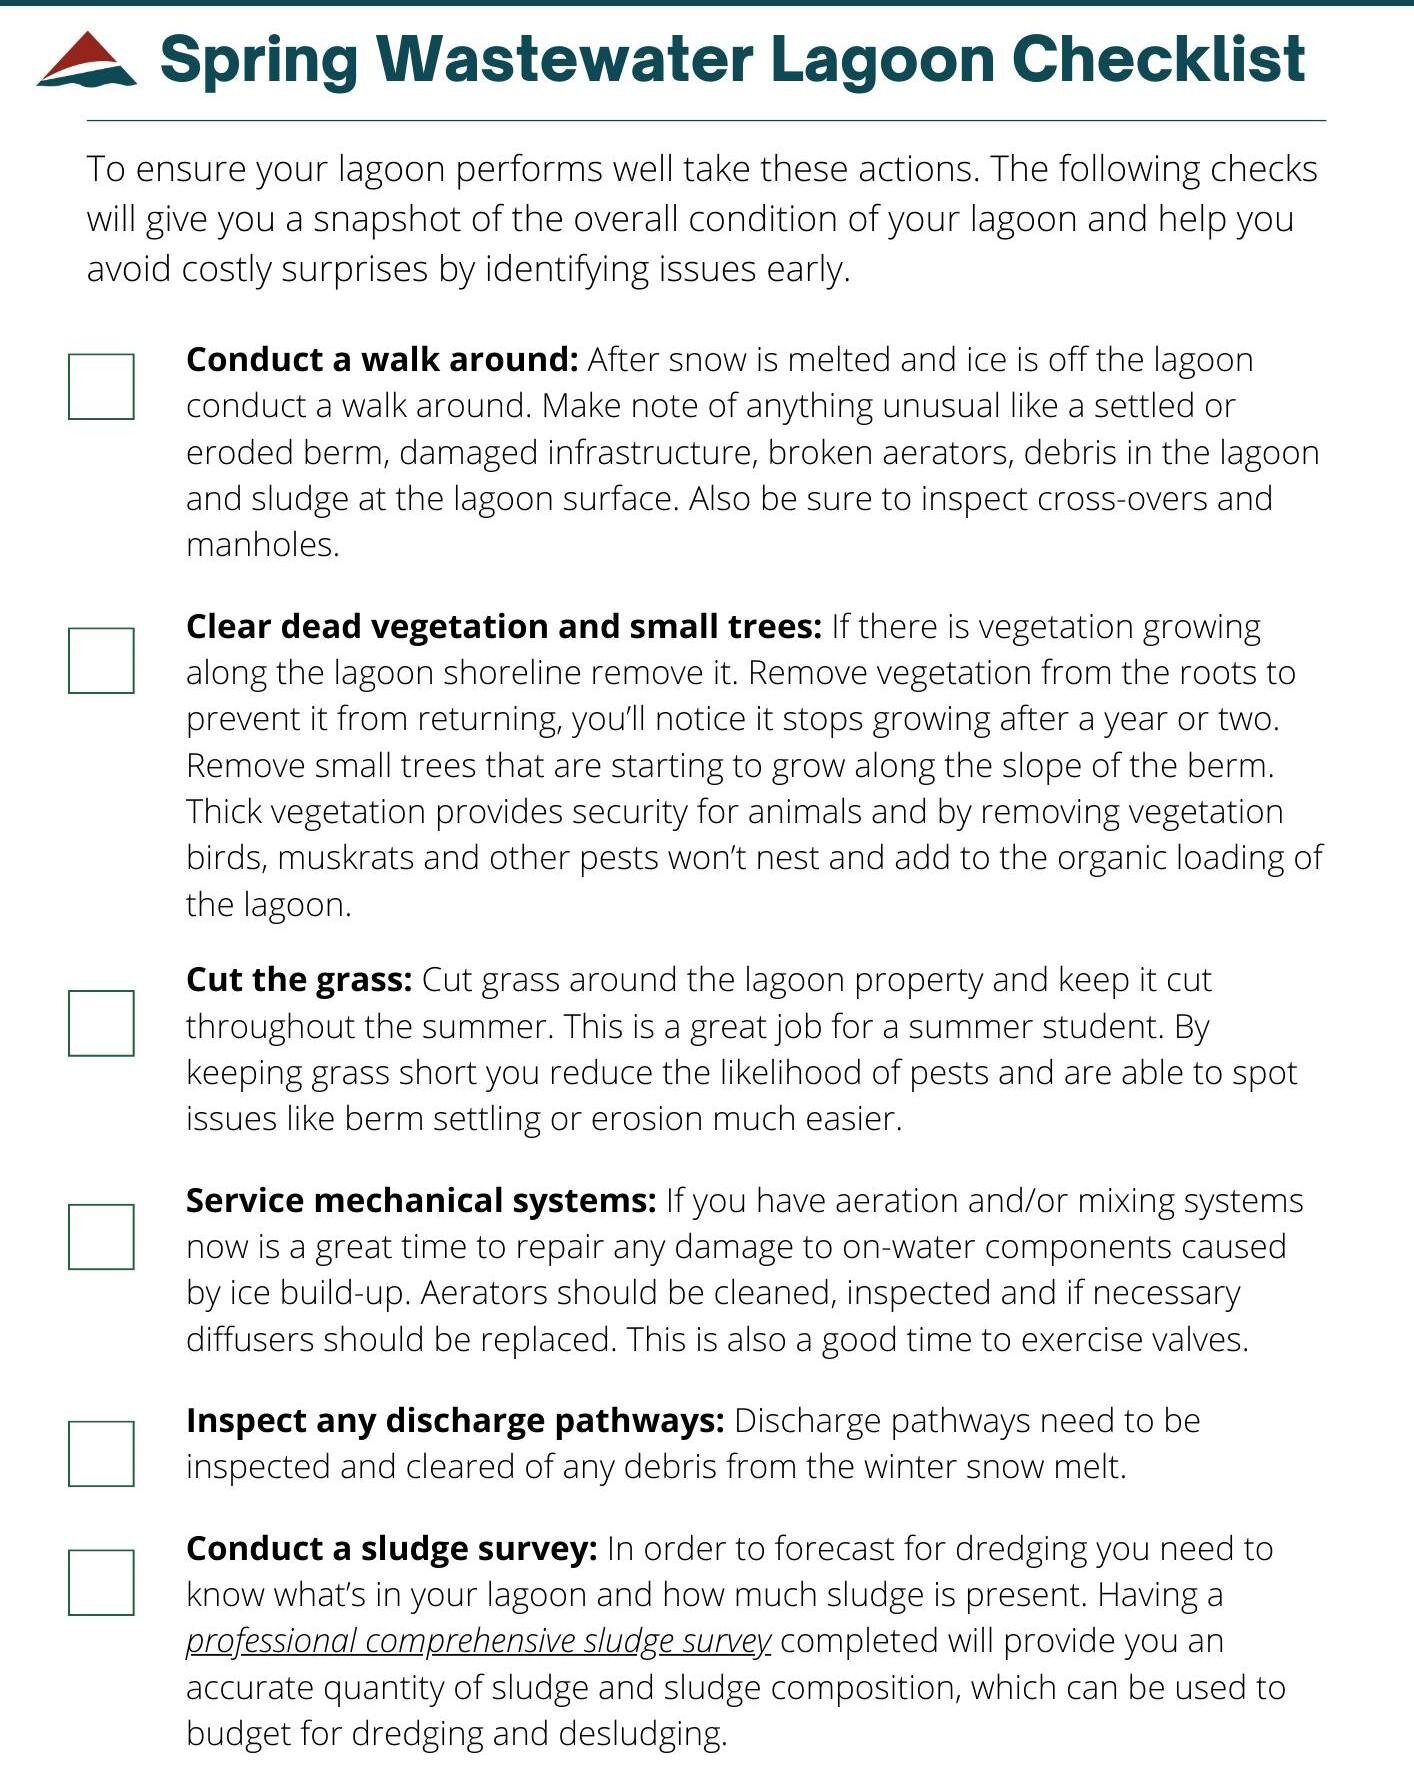 Now is a great time to walk around your lagoon and inspect it for the following items. This checklist provides you with an overview of the overall condition of your lagoon and can help determine if there are maintenance projects that need to be compl